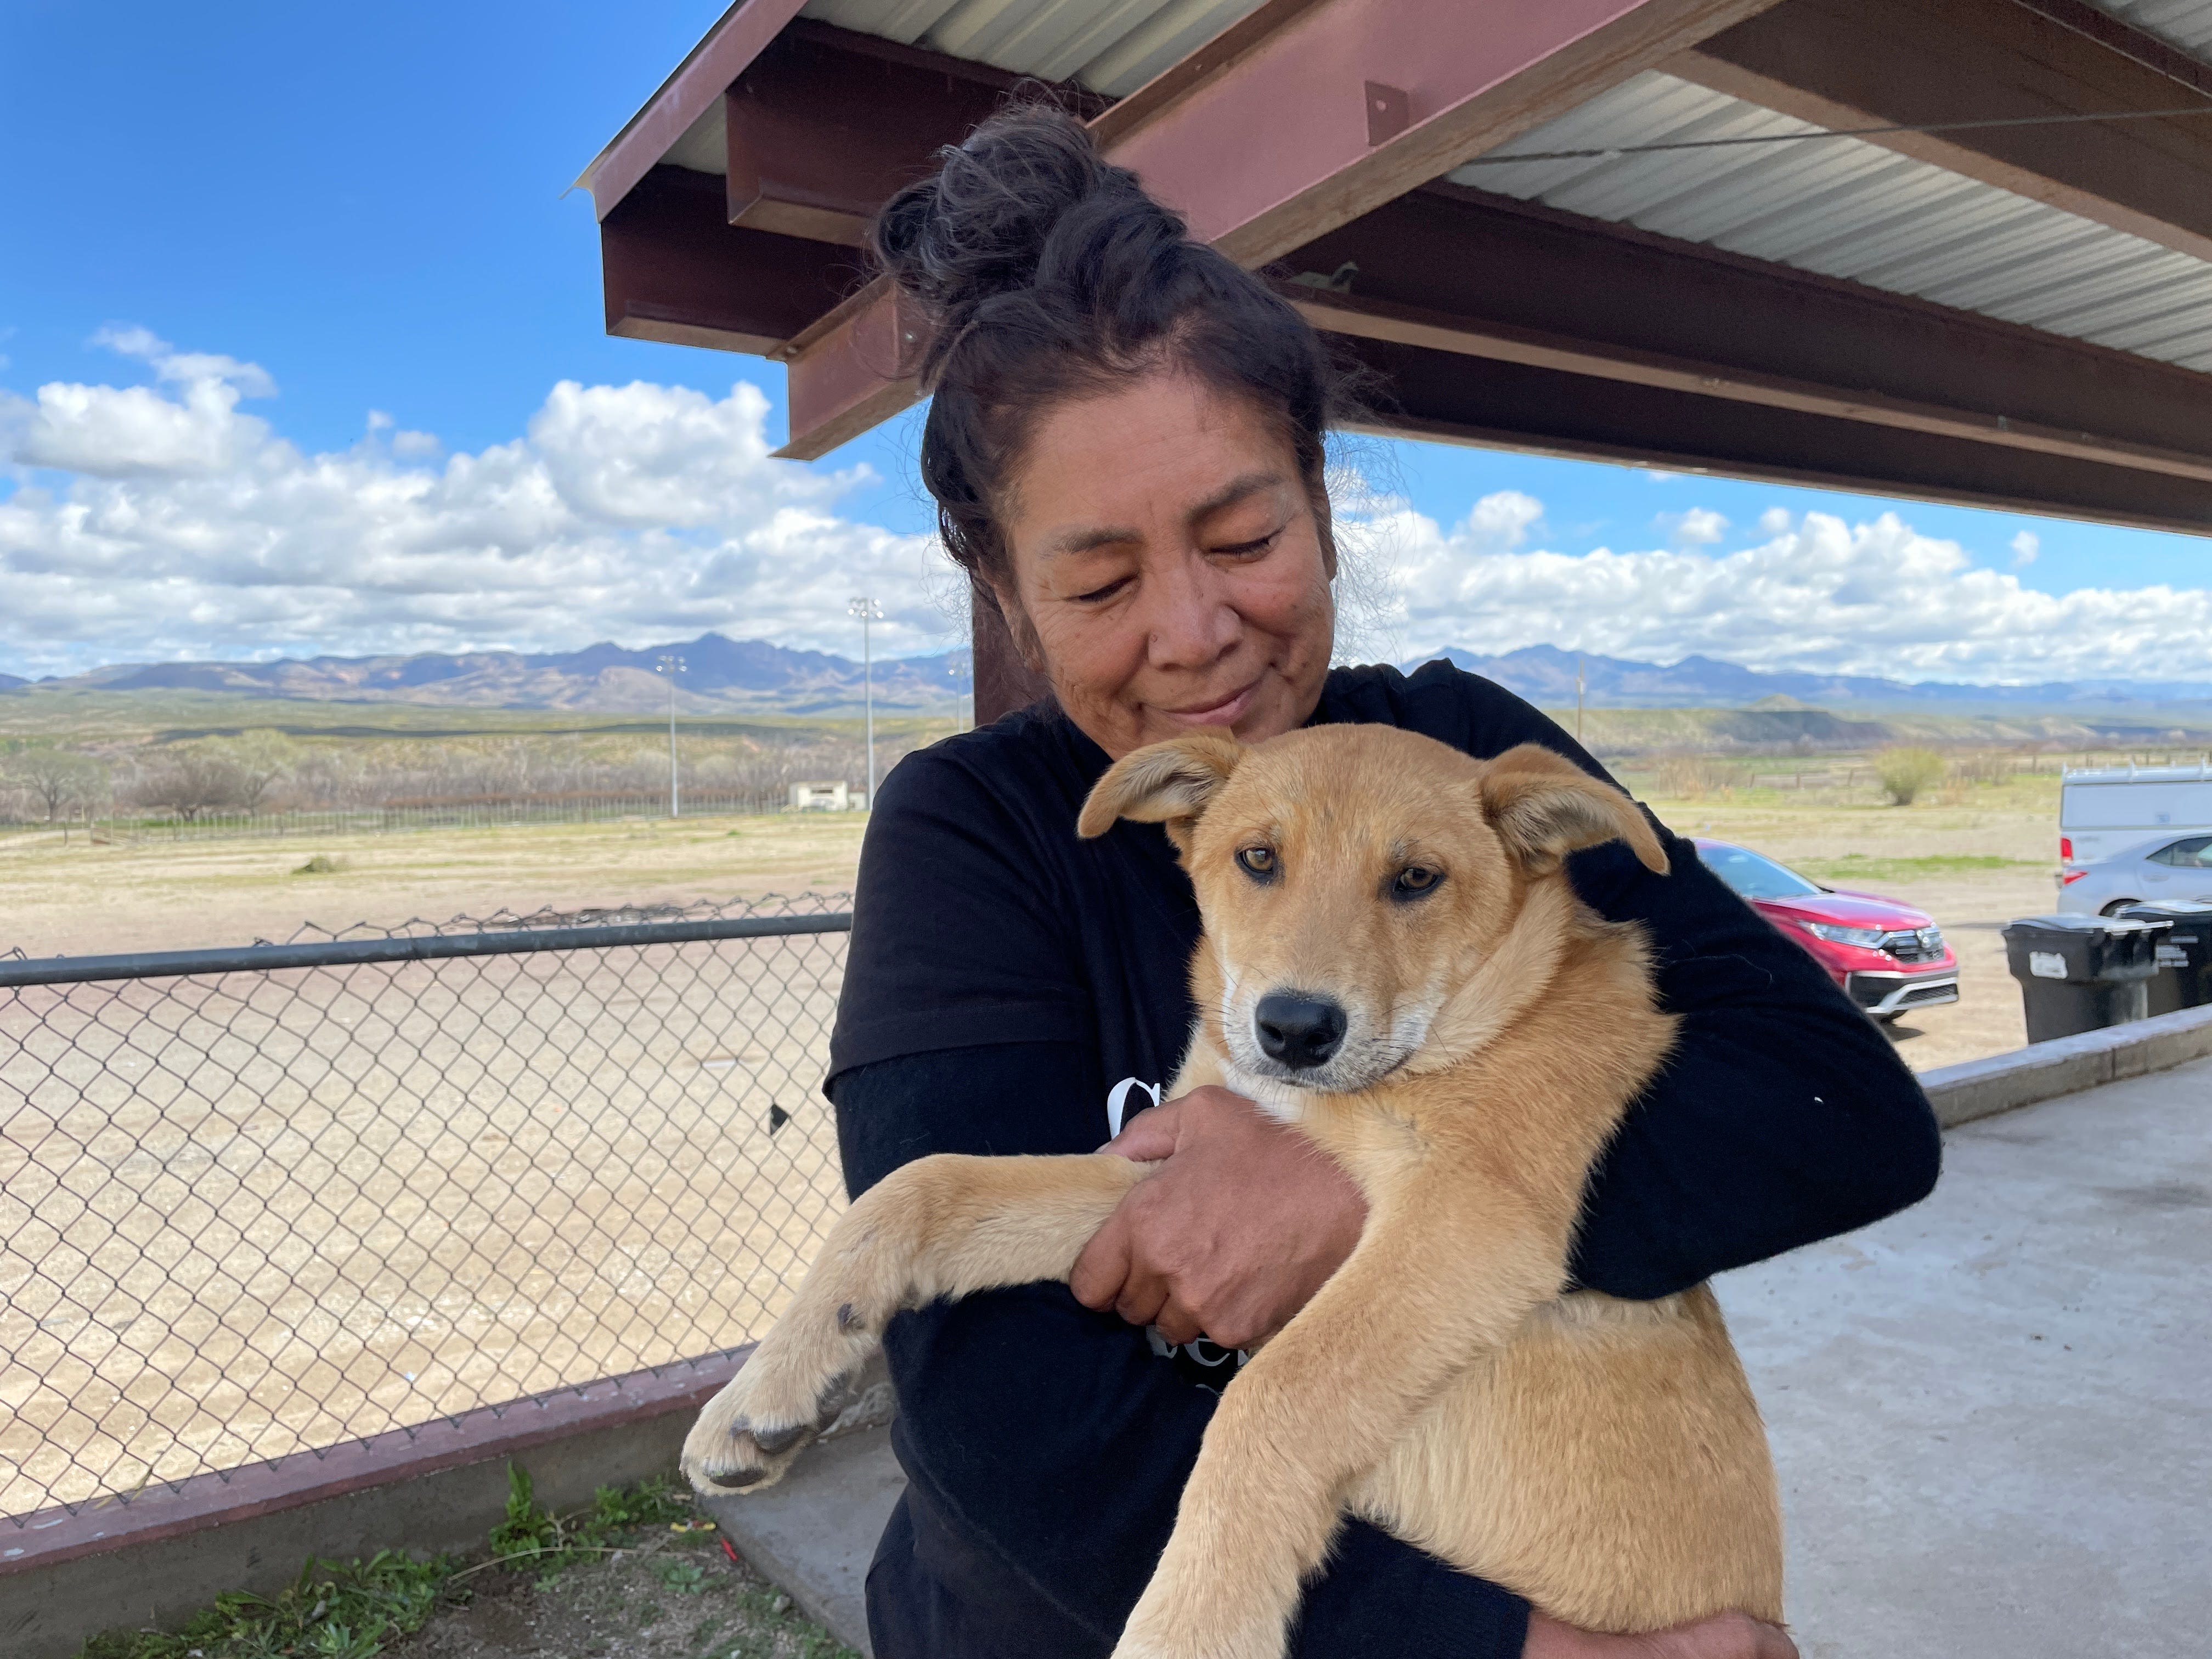 San Carlos woman celebrated for her unwavering support of pets, animals on reservation